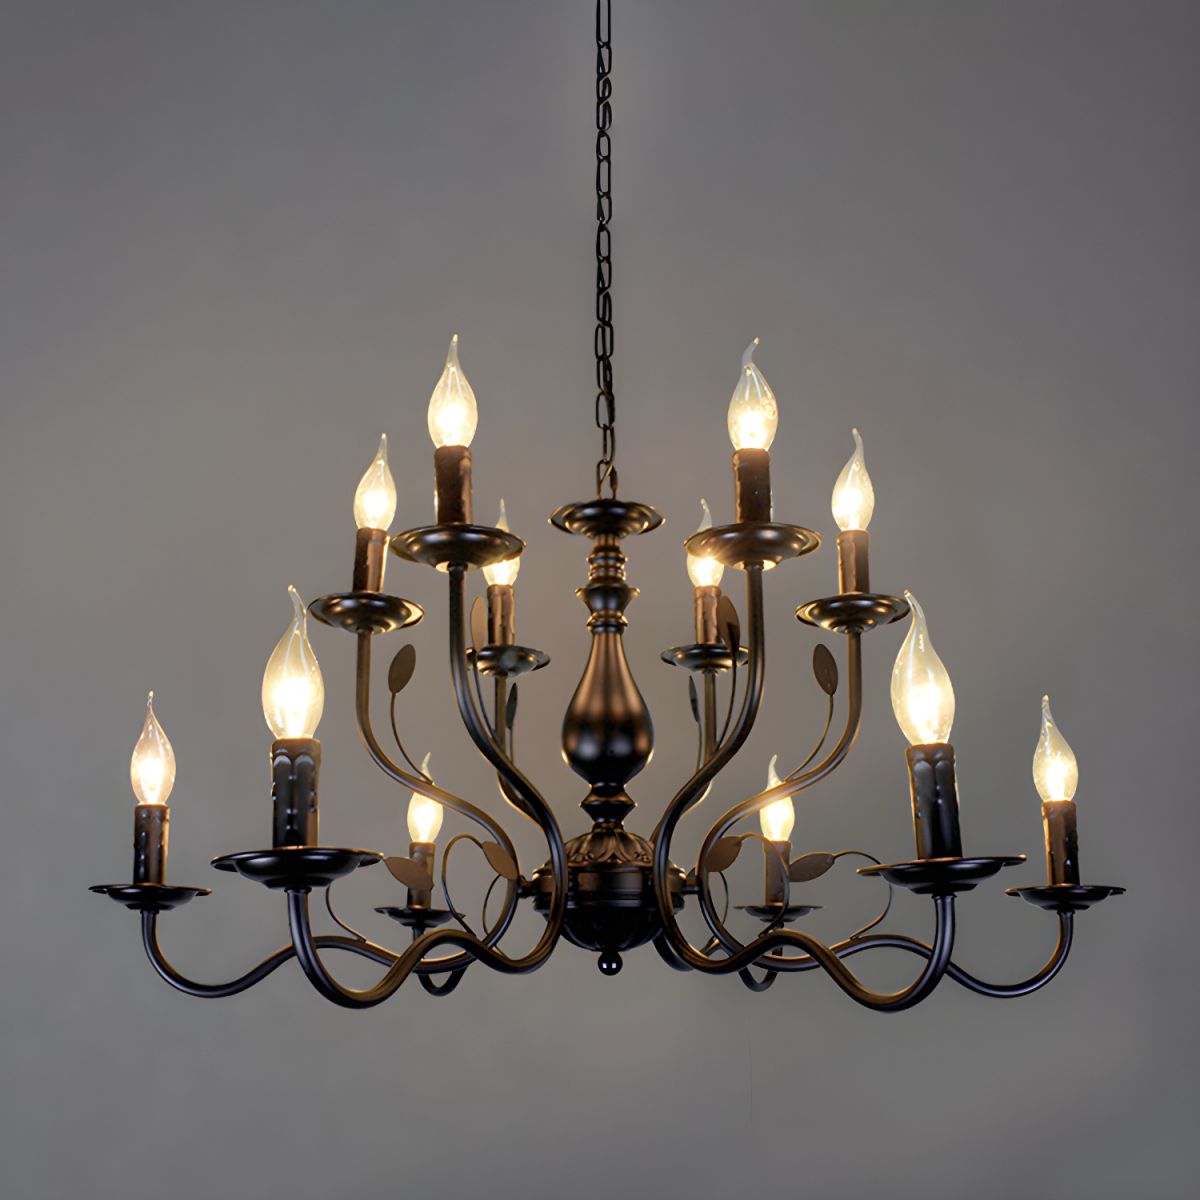 Silva Transitional Candle Chain Chandelier, Black